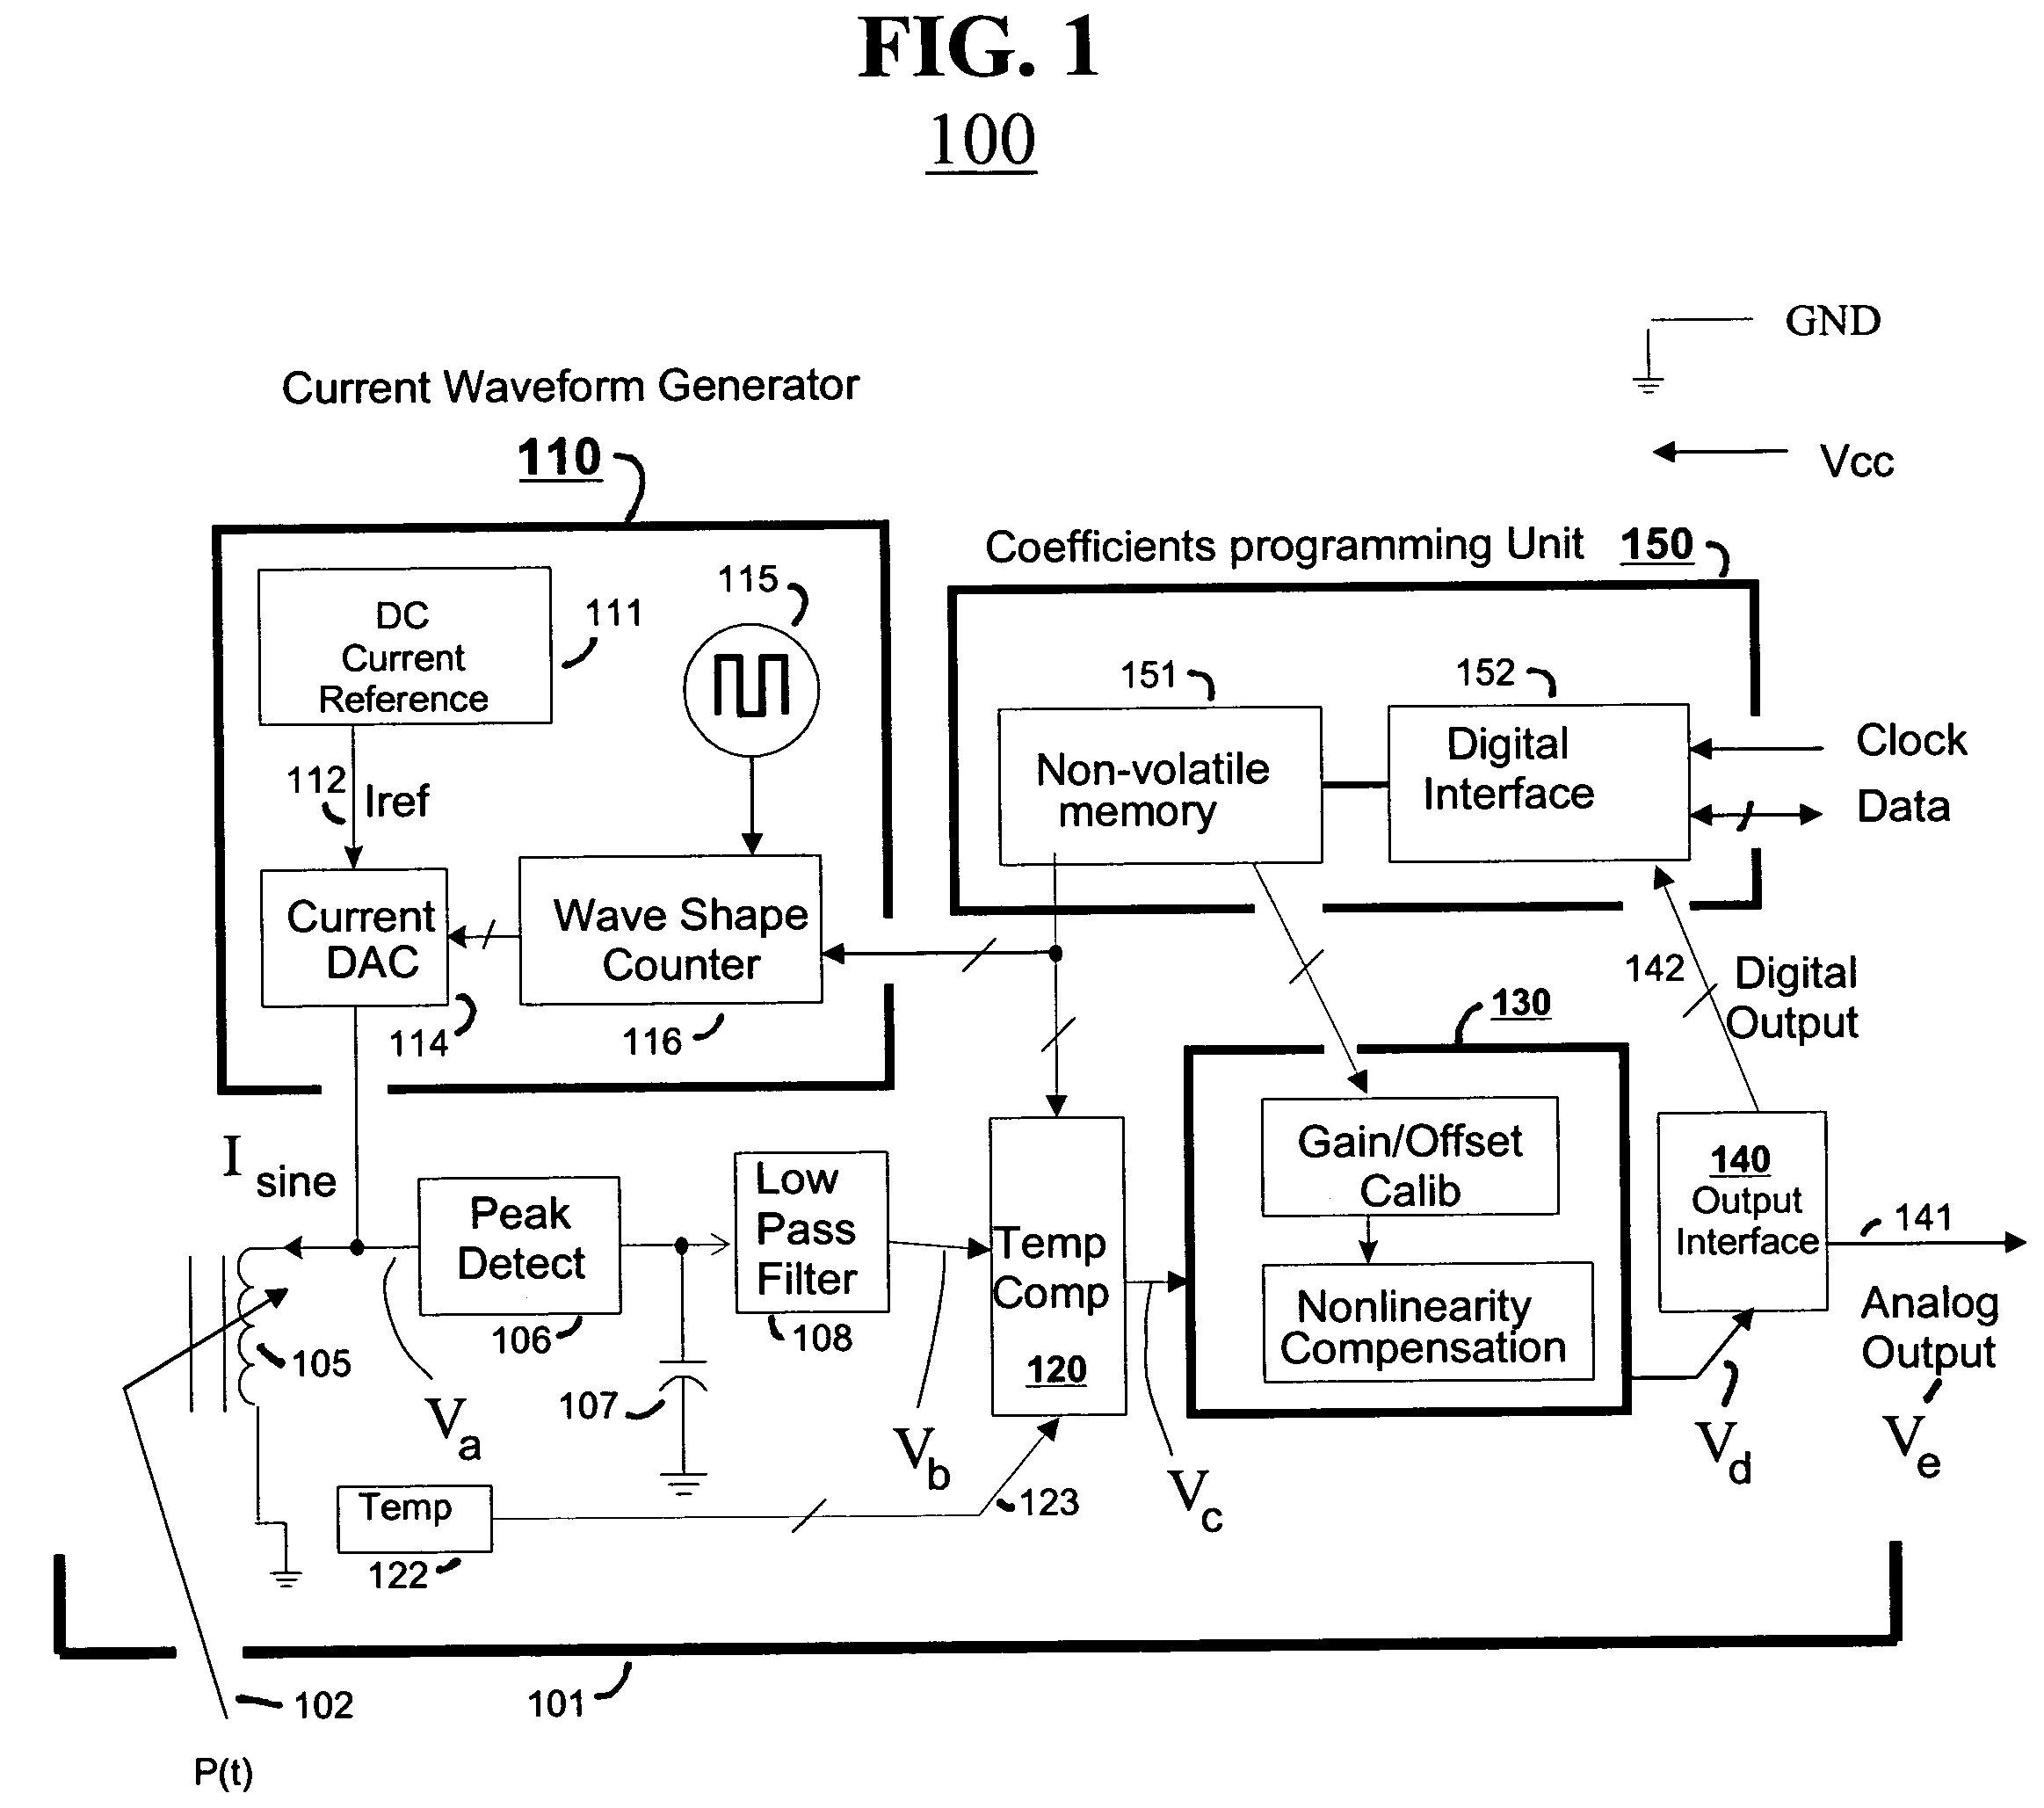 Reactive sensor modules using Pade' Approximant based compensation and providing module-sourced excitation